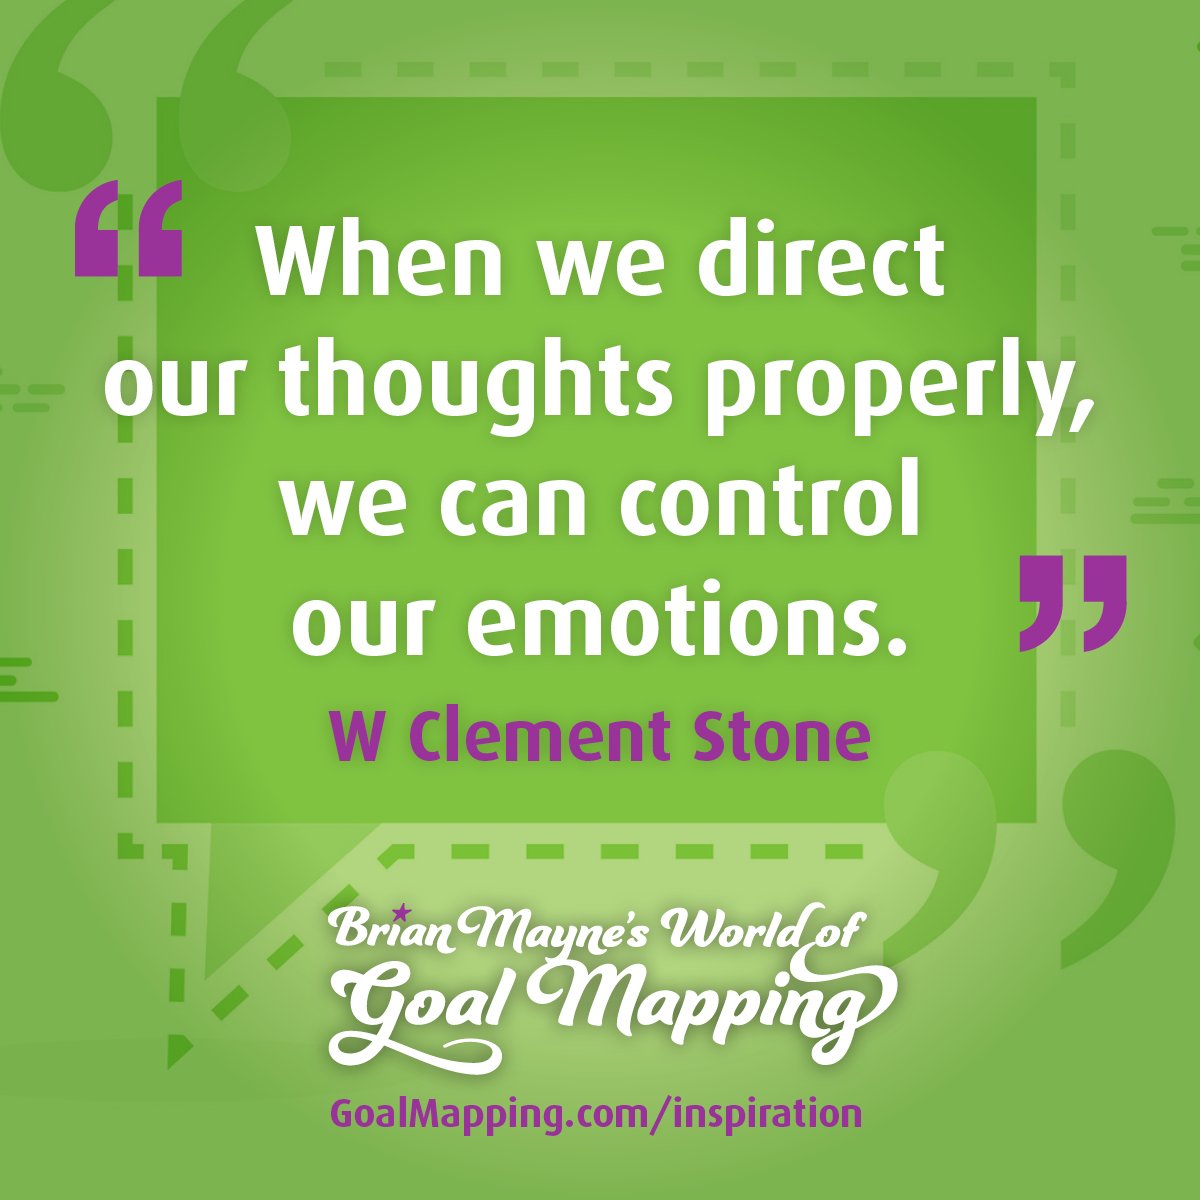 "When we direct our thoughts properly, we can control our emotions." W Clement Stone